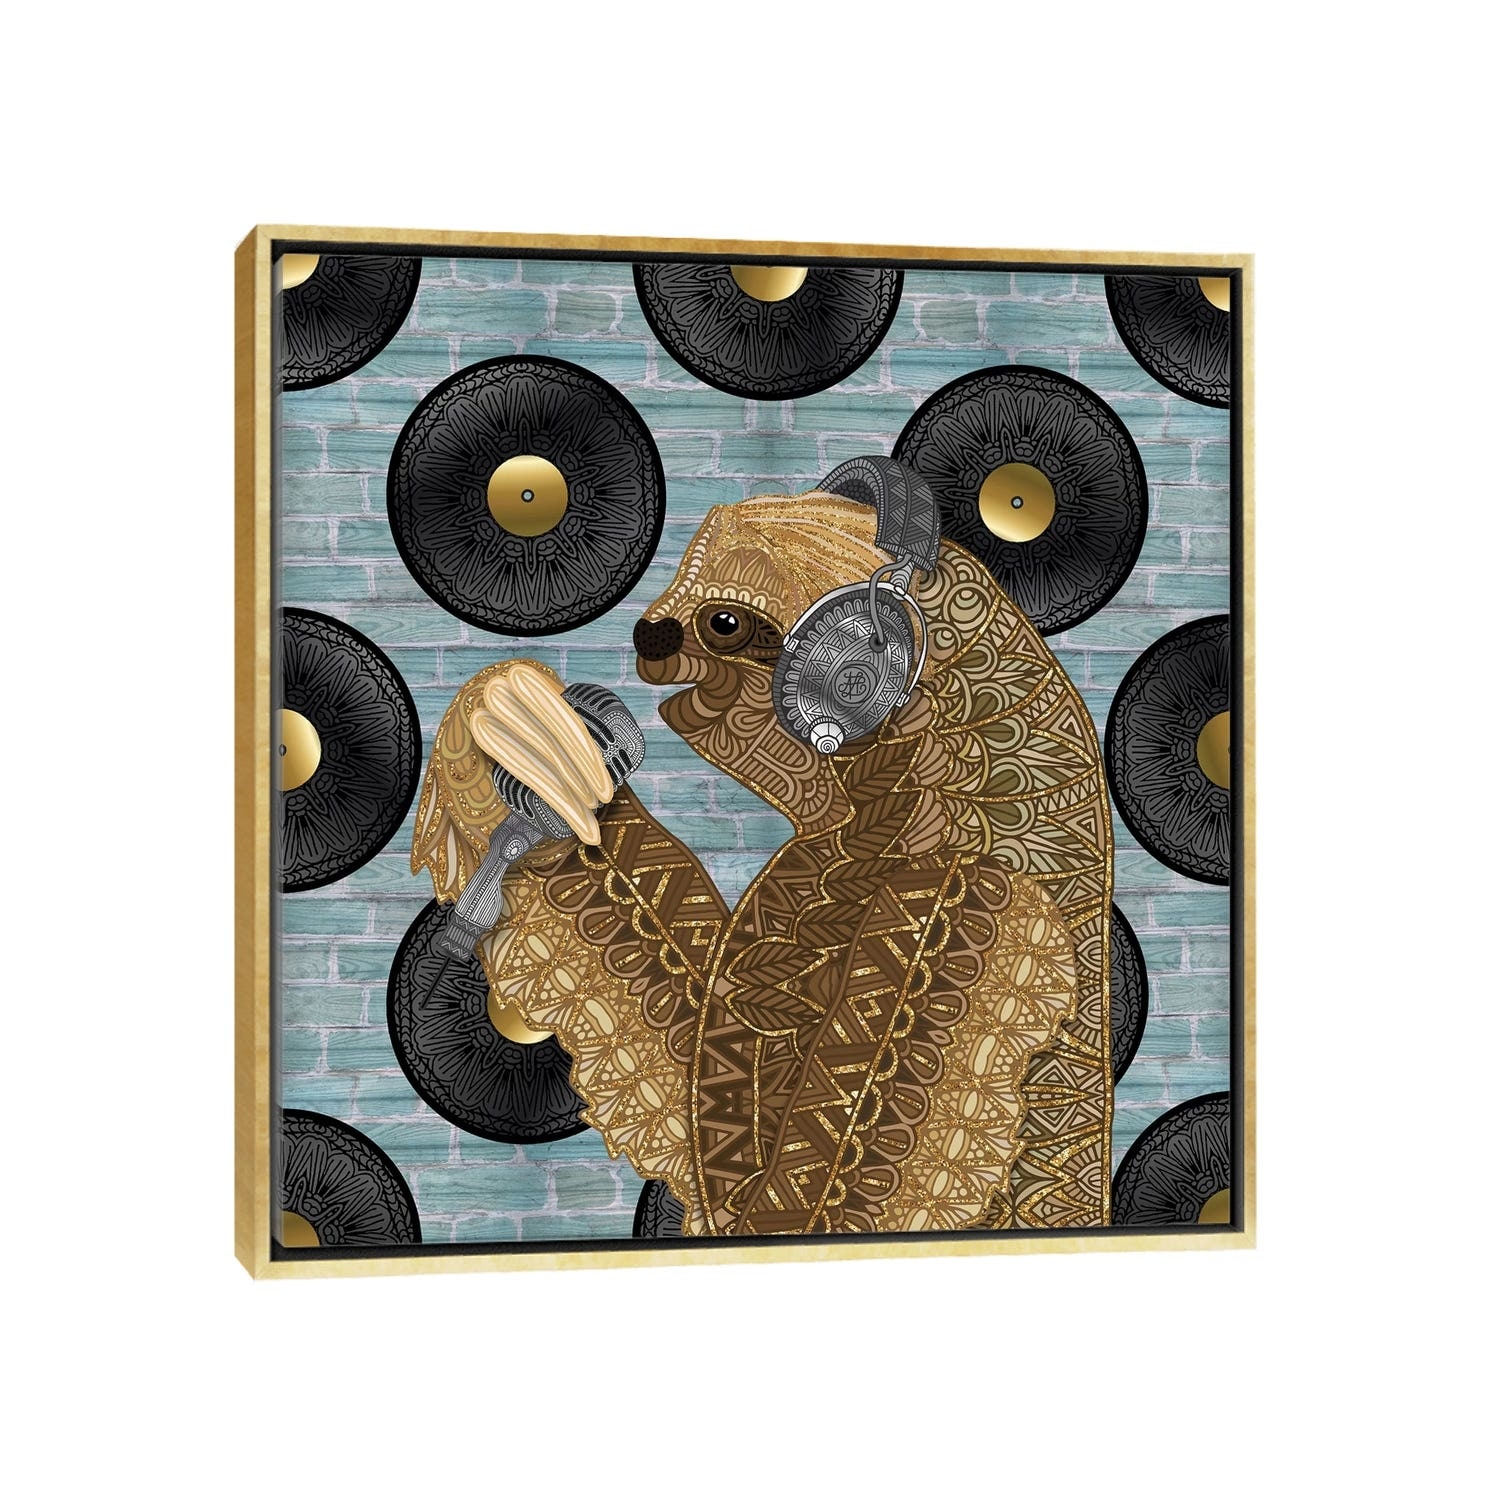 Singingin Shower Curtain Set with Bathroom Rugs and Mats Sloth